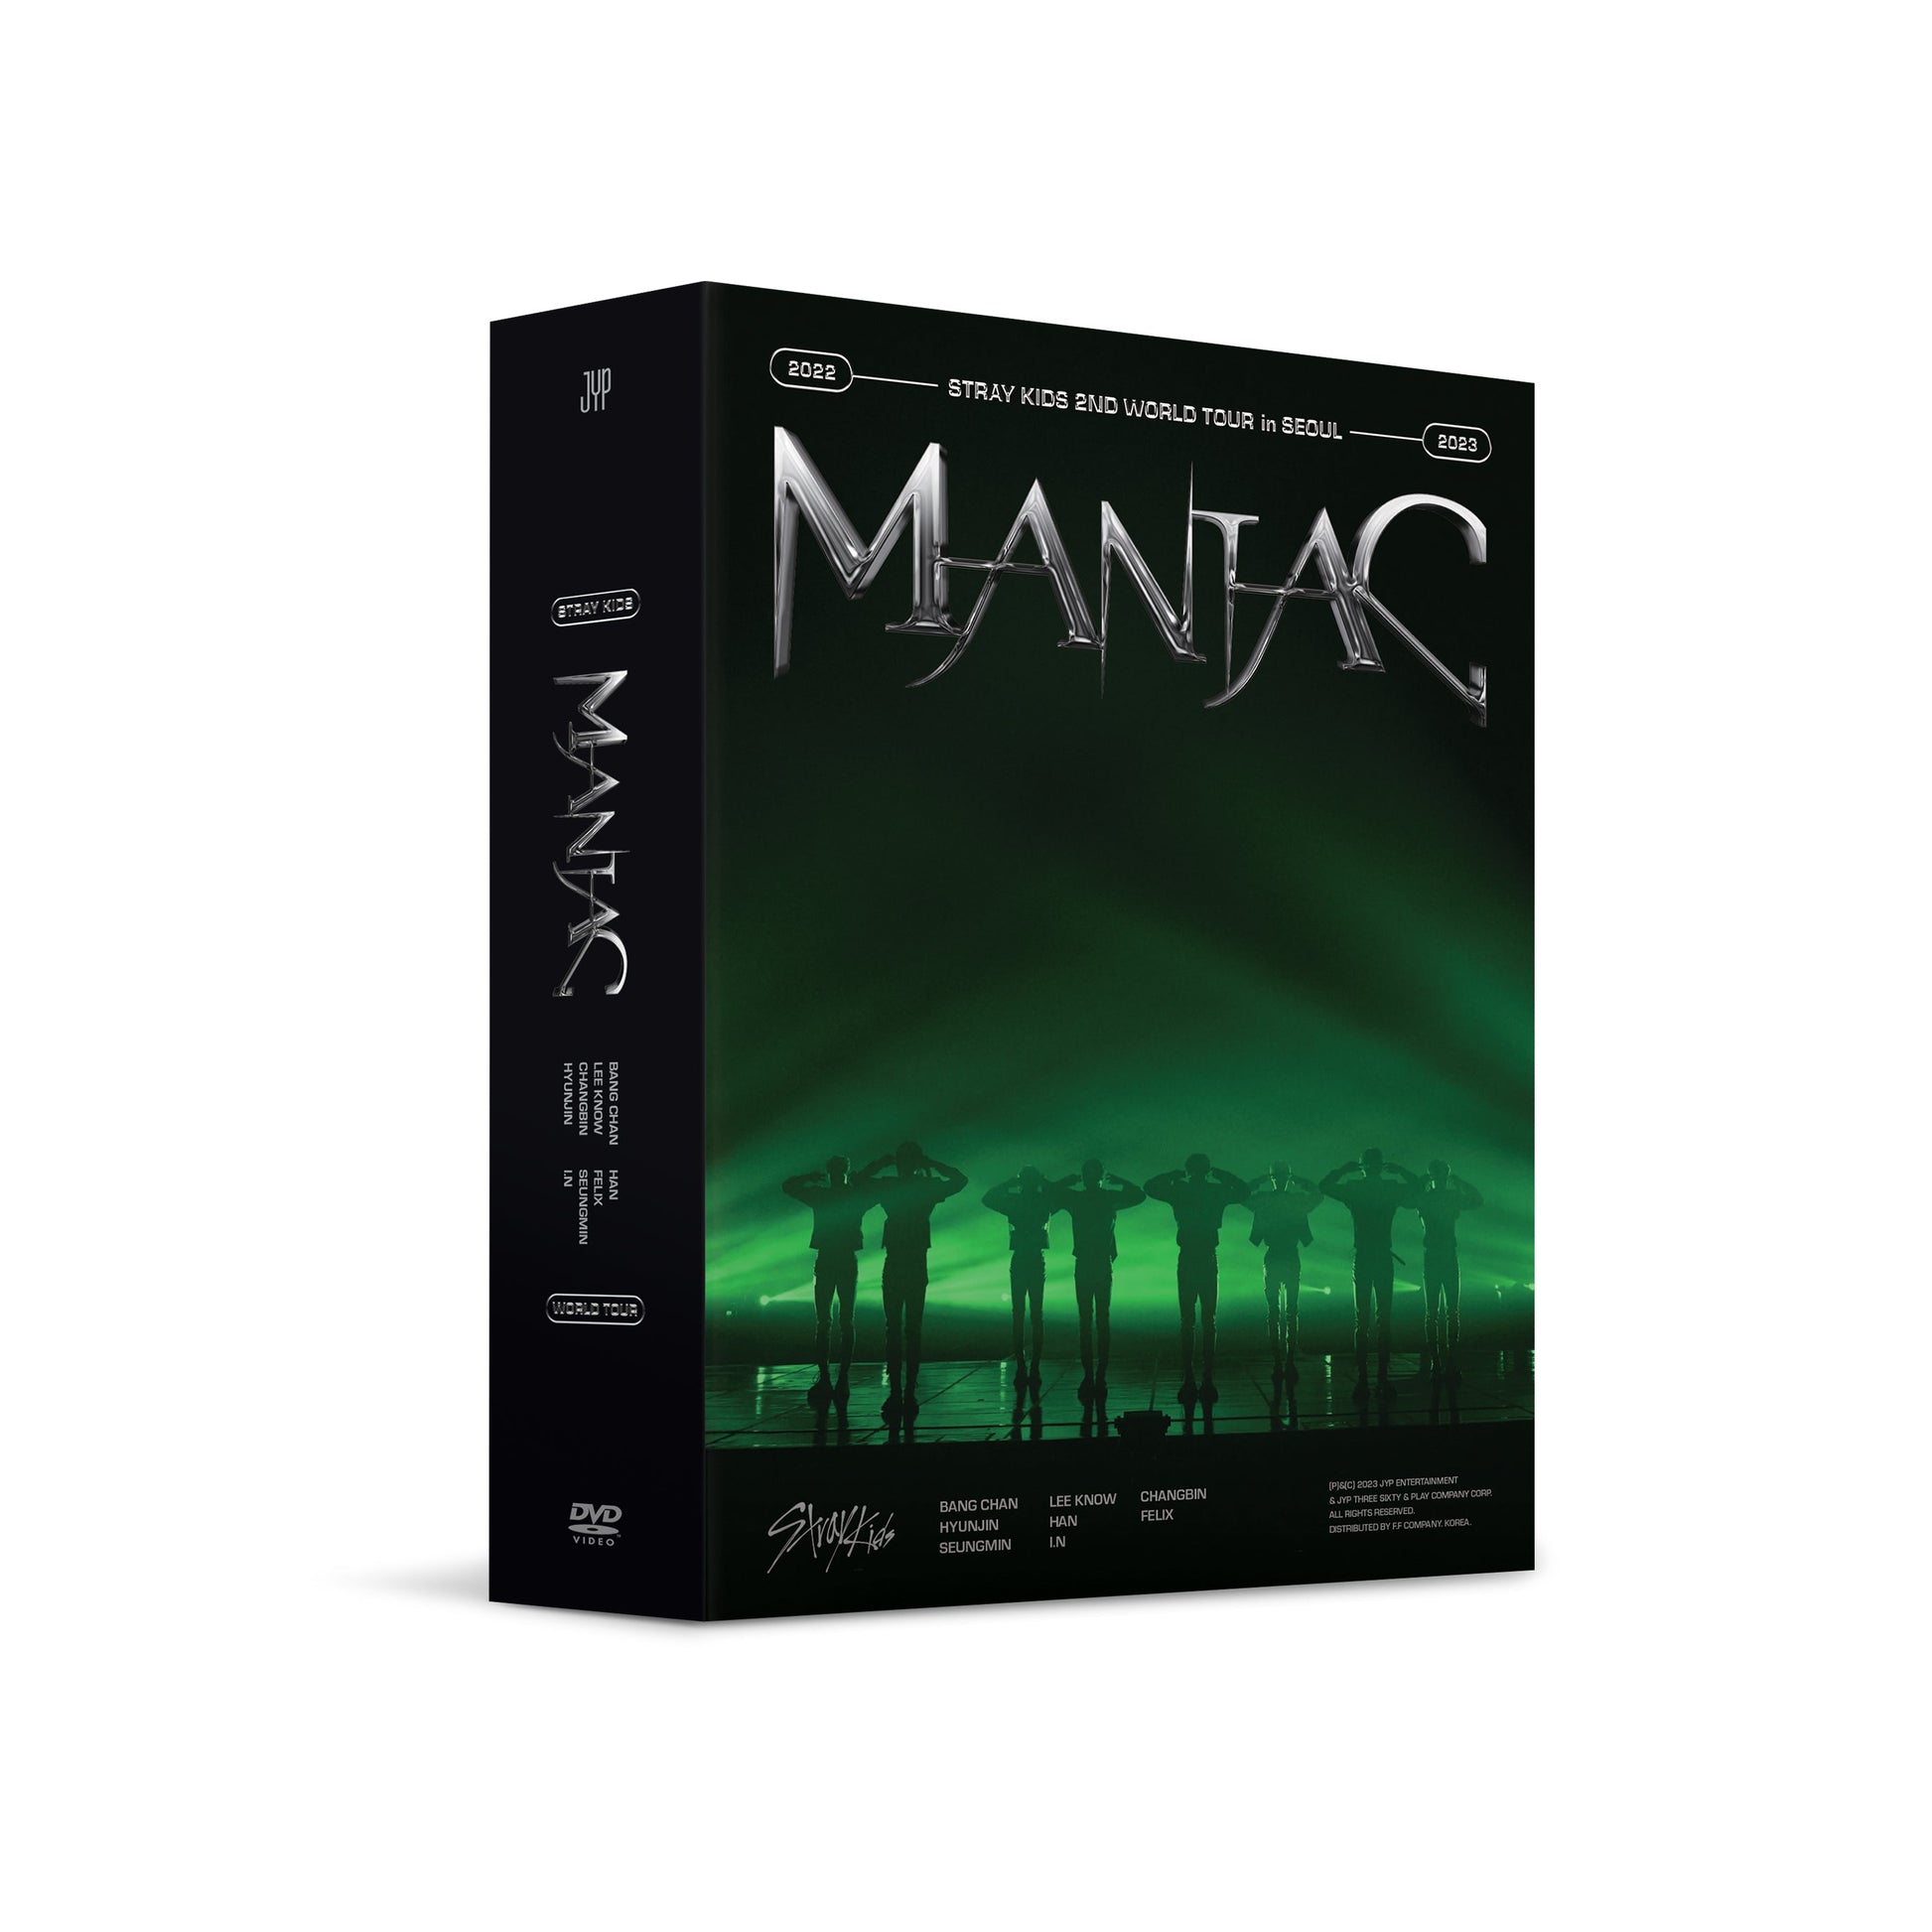 STRAY KIDS 2ND WORLD TOUR IN SEOUL 'MANIAC' (DVD) COVER